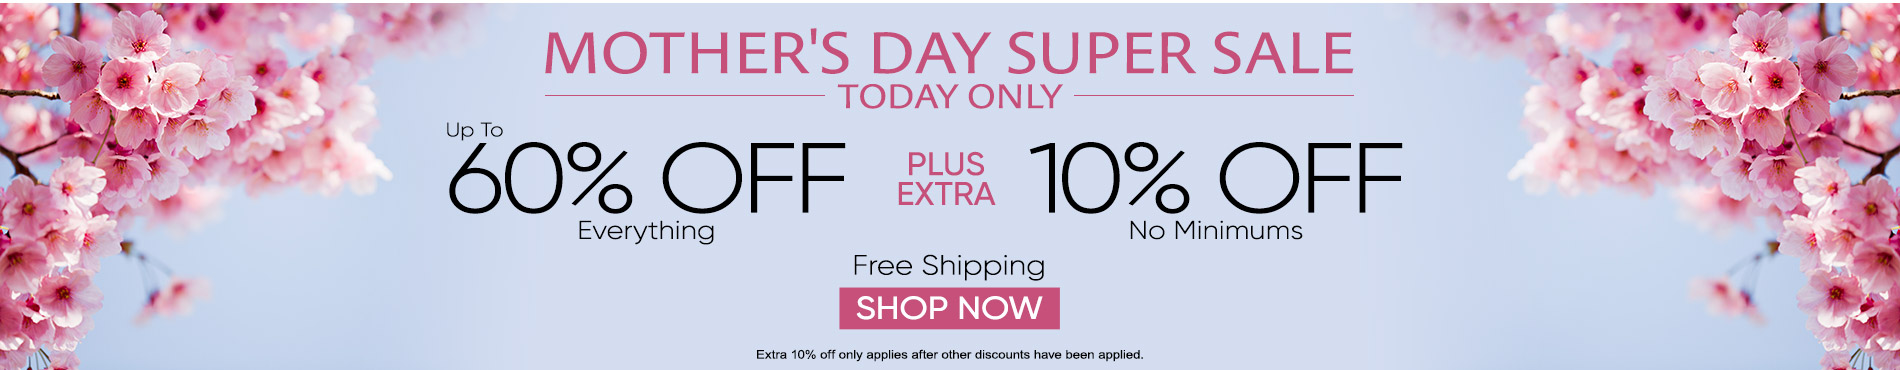 Save up to 60% + extra 10% on everything